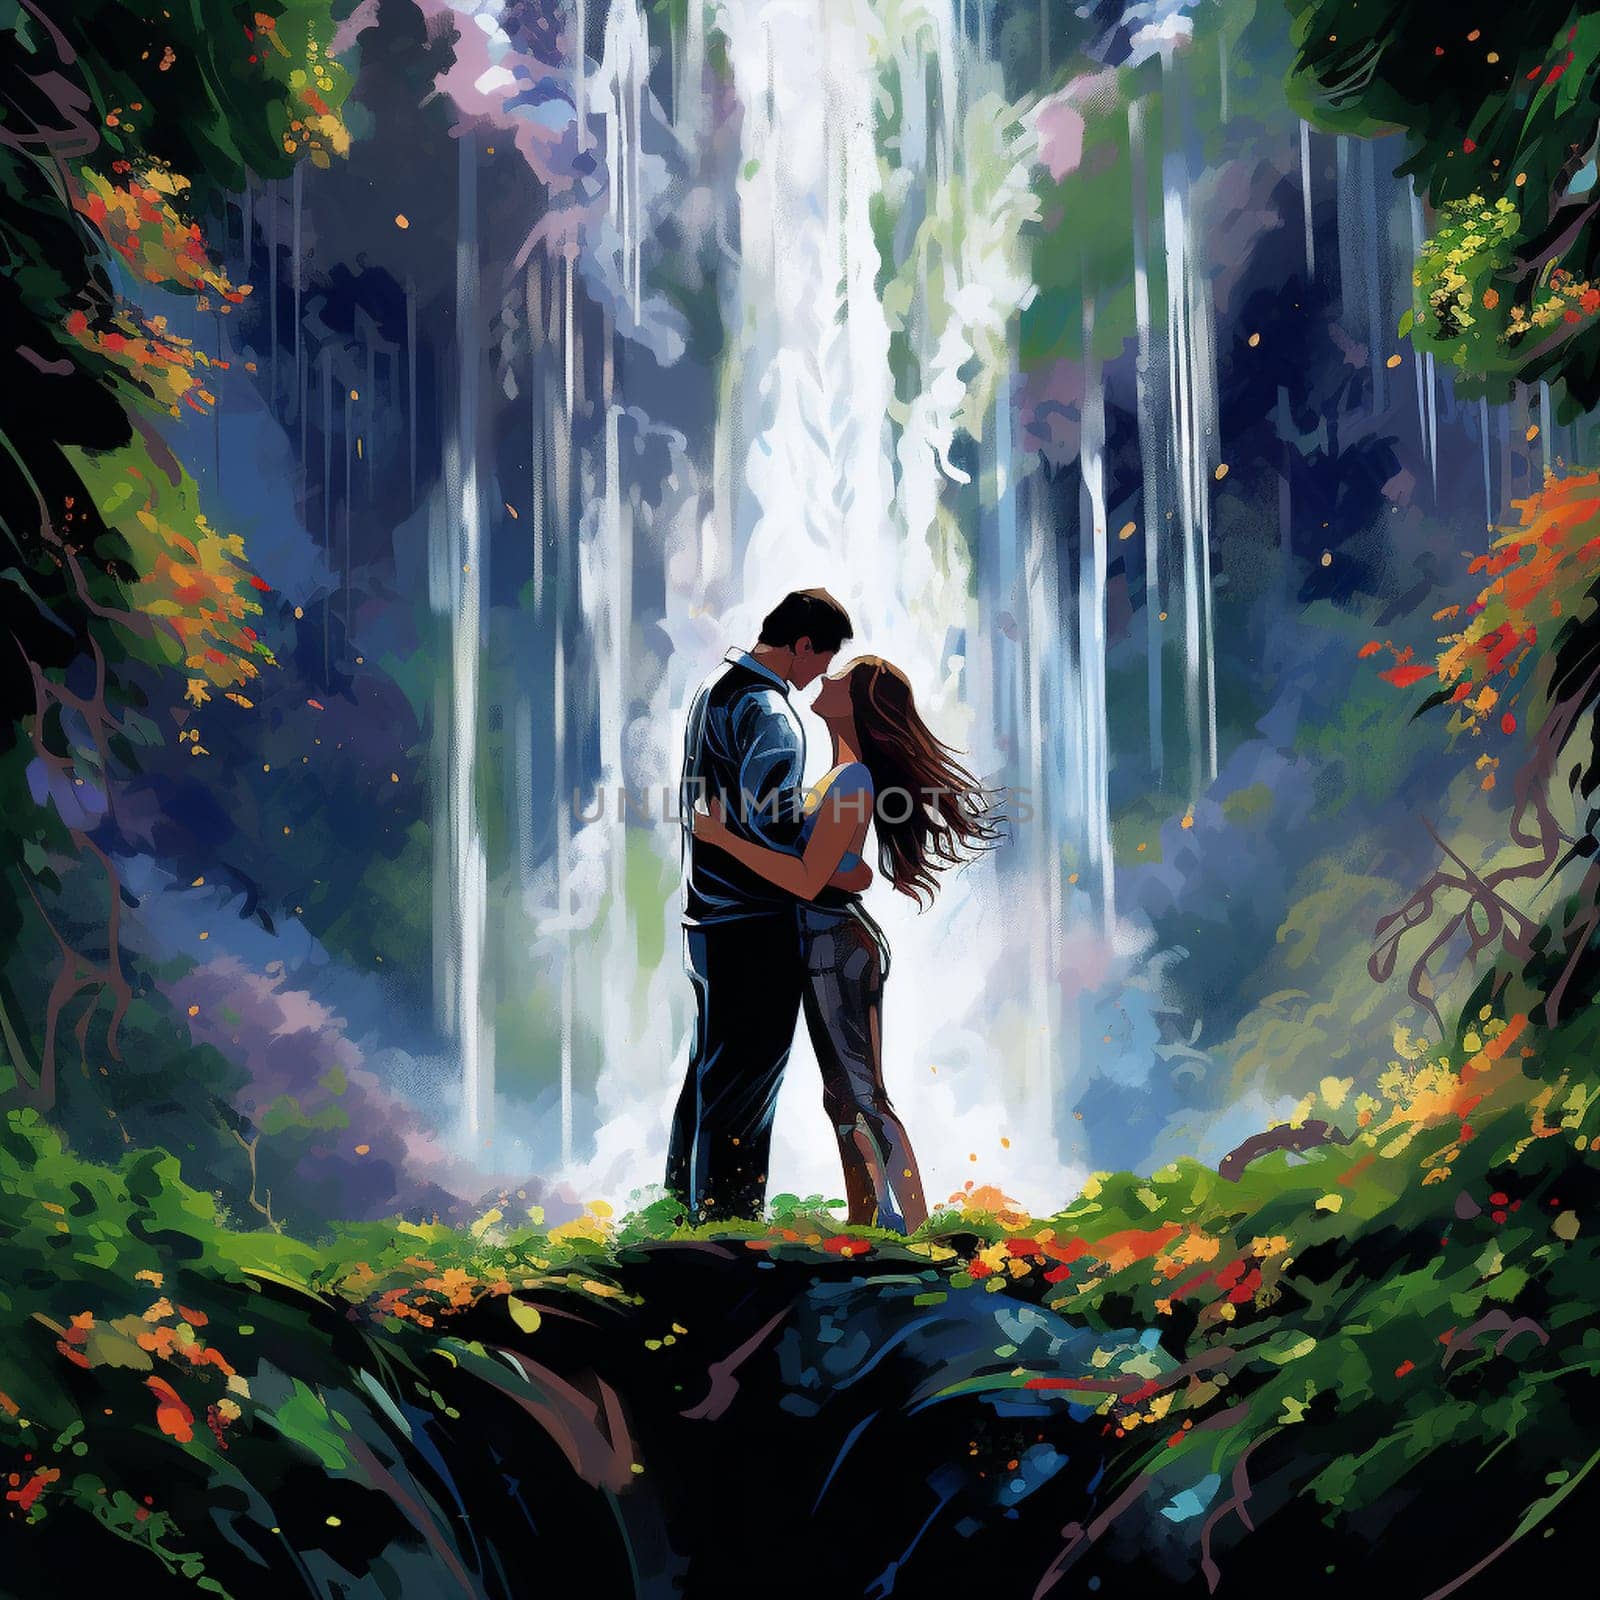 Generate an illustration in the art style of vibrant digital painting that portrays a breathtaking scene. Imagine a couple, dressed in elegant wedding attire, standing on a moss-covered rock beneath a towering waterfall. The cascading water creates a shimmering curtain, while colorful flowers and lush greenery surround the scene. The couple's arms are outstretched towards each other, their faces filled with love and anticipation, as they exchange heartfelt vows. Let their emotions and the magnificence of the natural setting evoke a sense of awe and enchantment.